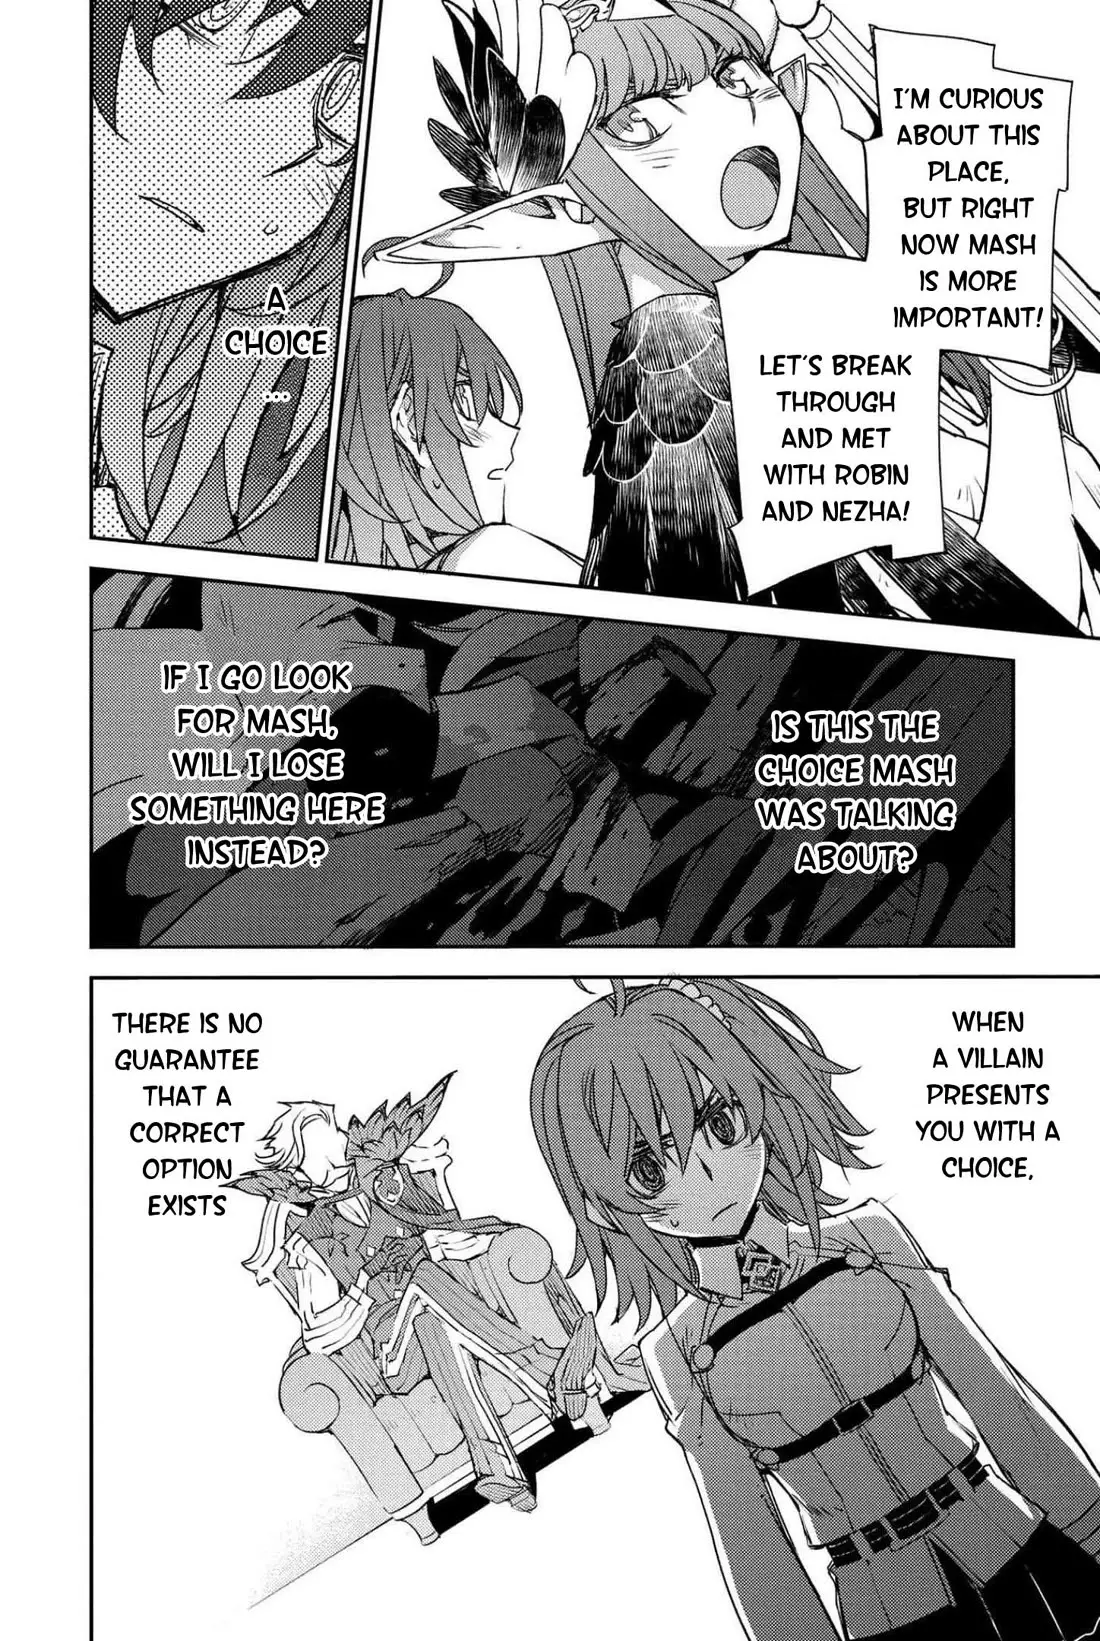 Fate/grand Order: Epic Of Remnant - Subspecies Singularity Iv: Taboo Advent Salem: Salem Of Heresy - 28 page 17-43fadcfe